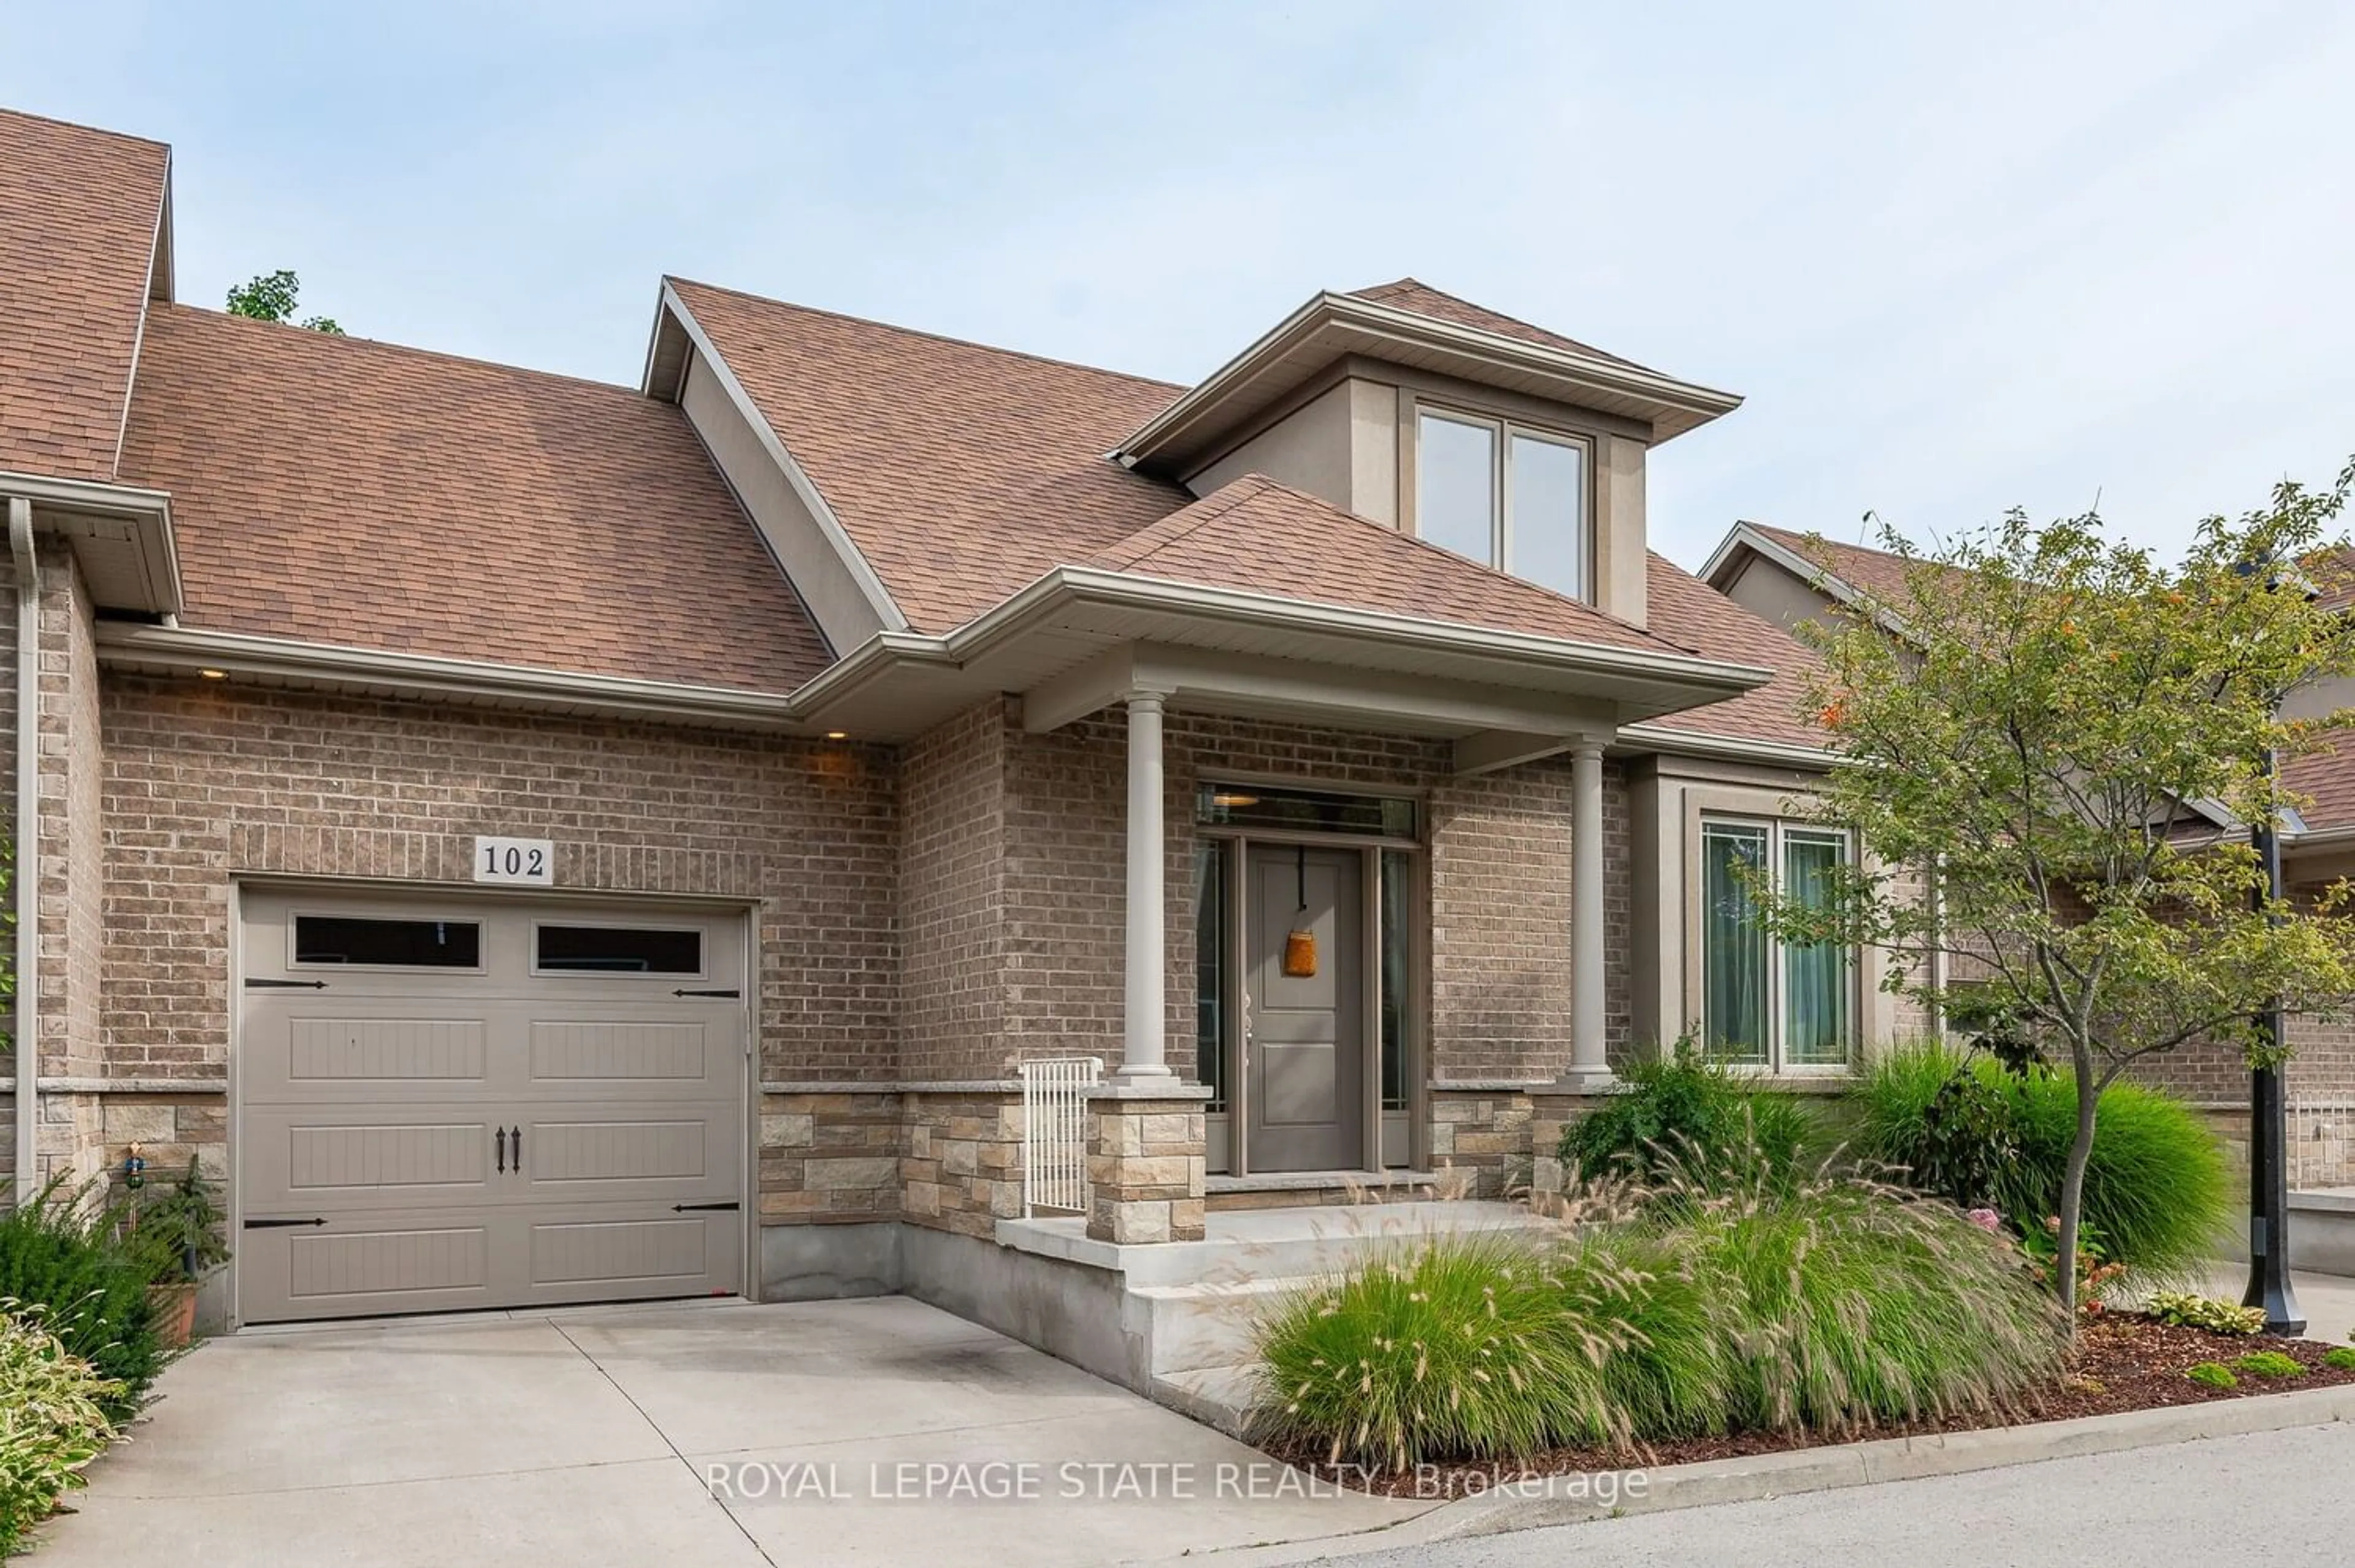 Home with brick exterior material for 6186 Dorchester Rd #102, Niagara Falls Ontario L2G 5T2